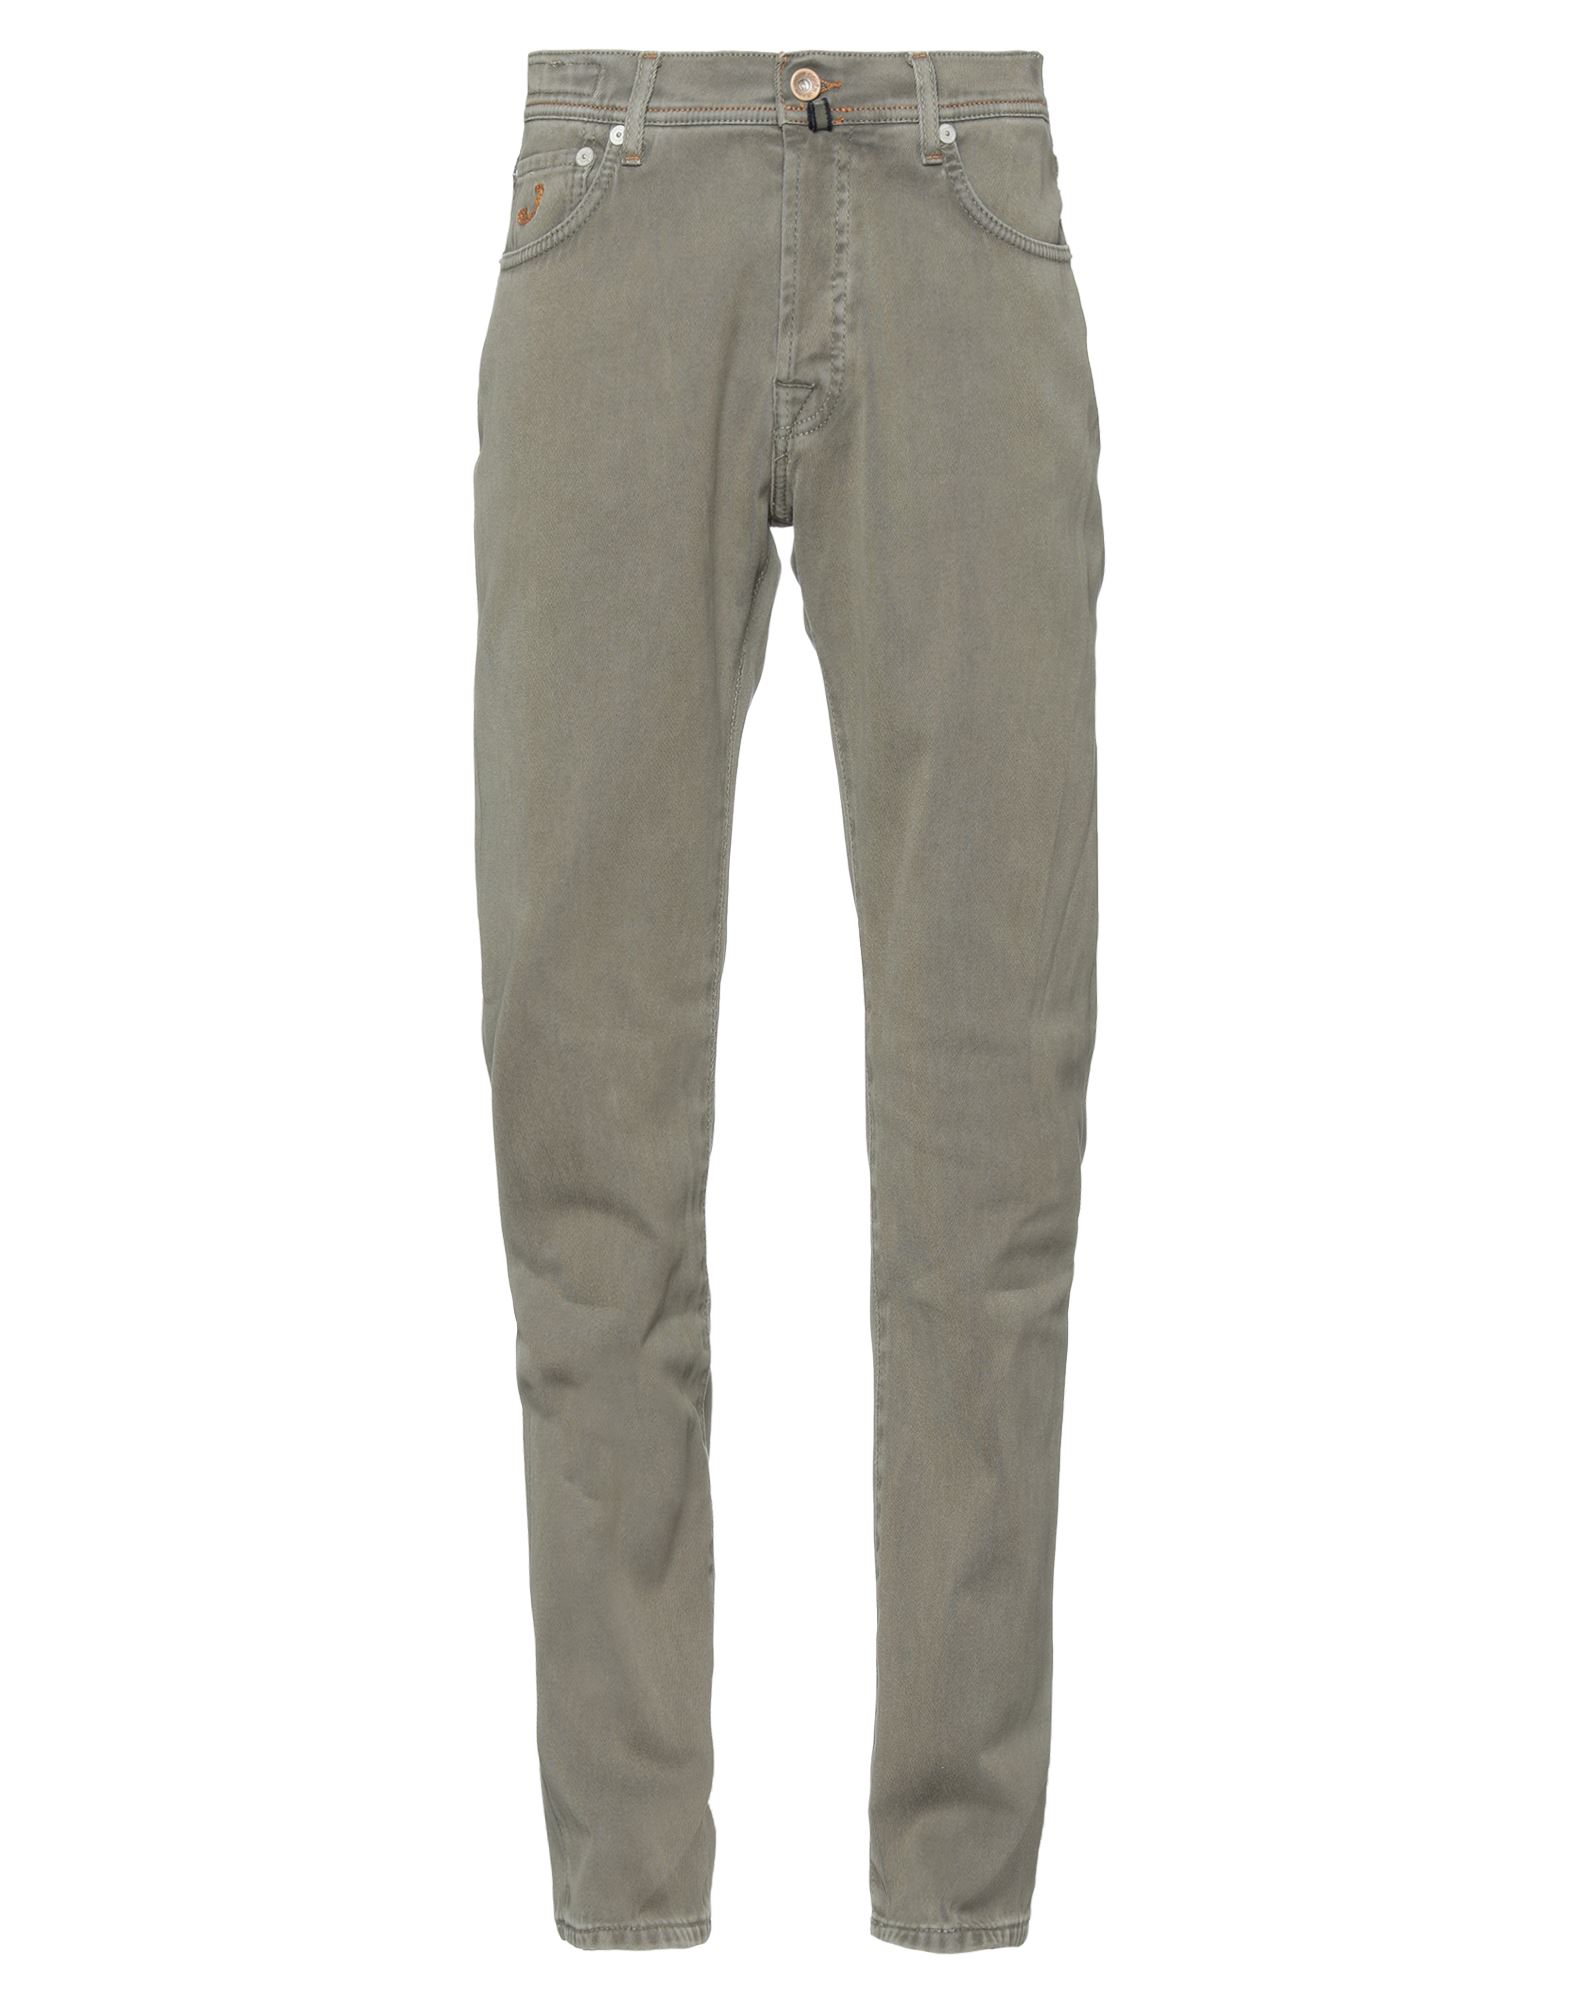 Jacob Cohёn Pants In Military Green